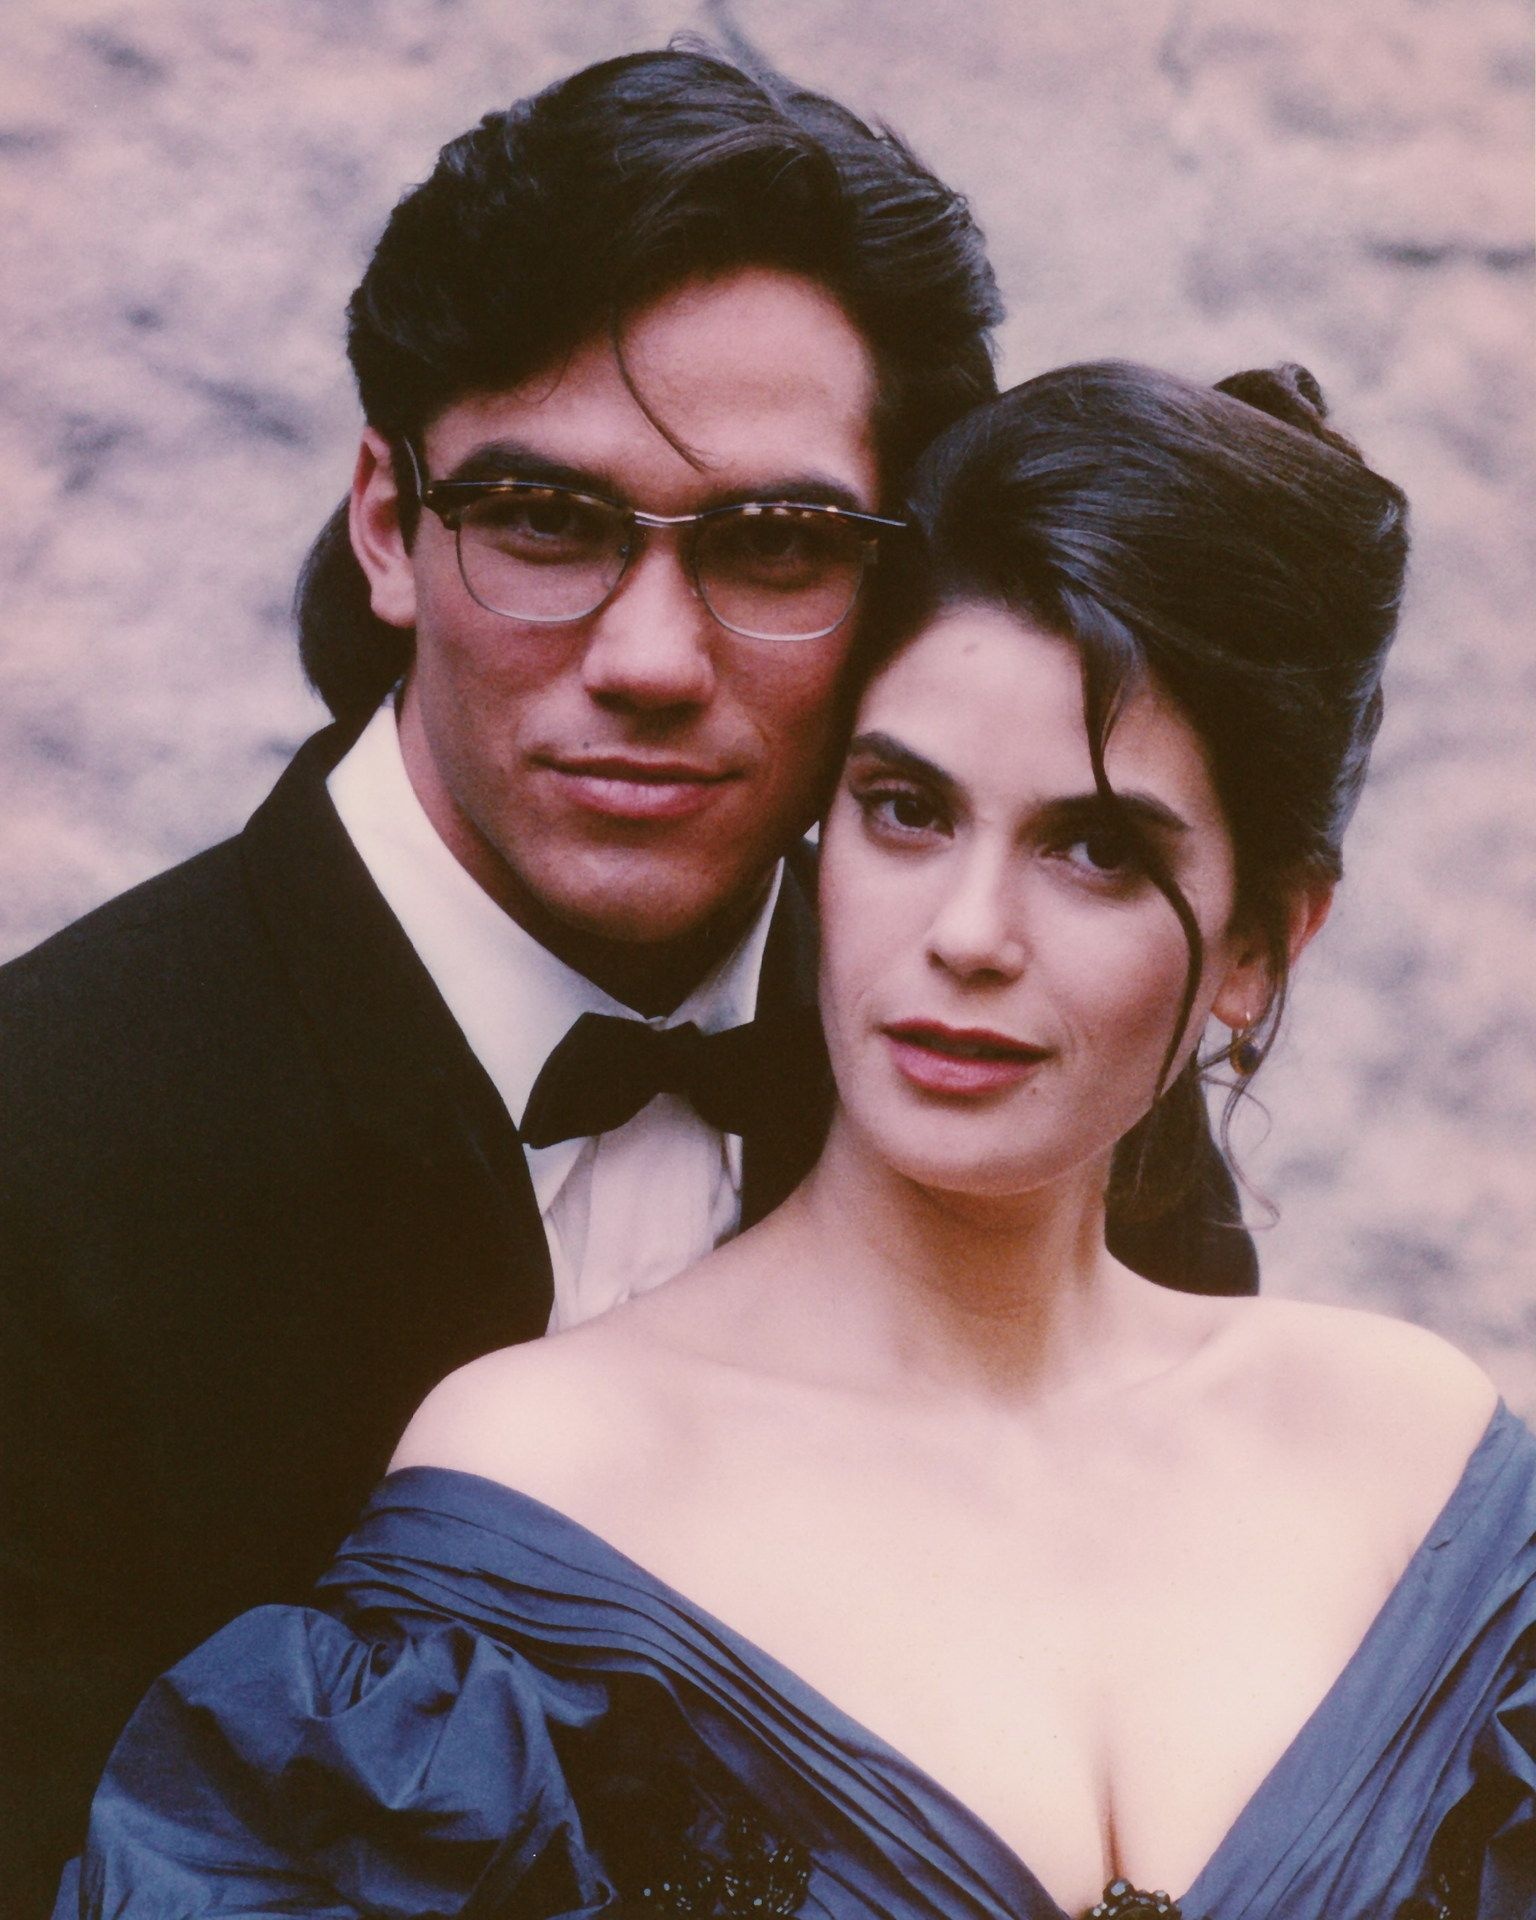 Lois and Clark: The New Adventures of Superman: The series loosely follows the modern origin of DC Comics characters, established by writer John Byrne. 1540x1920 HD Background.